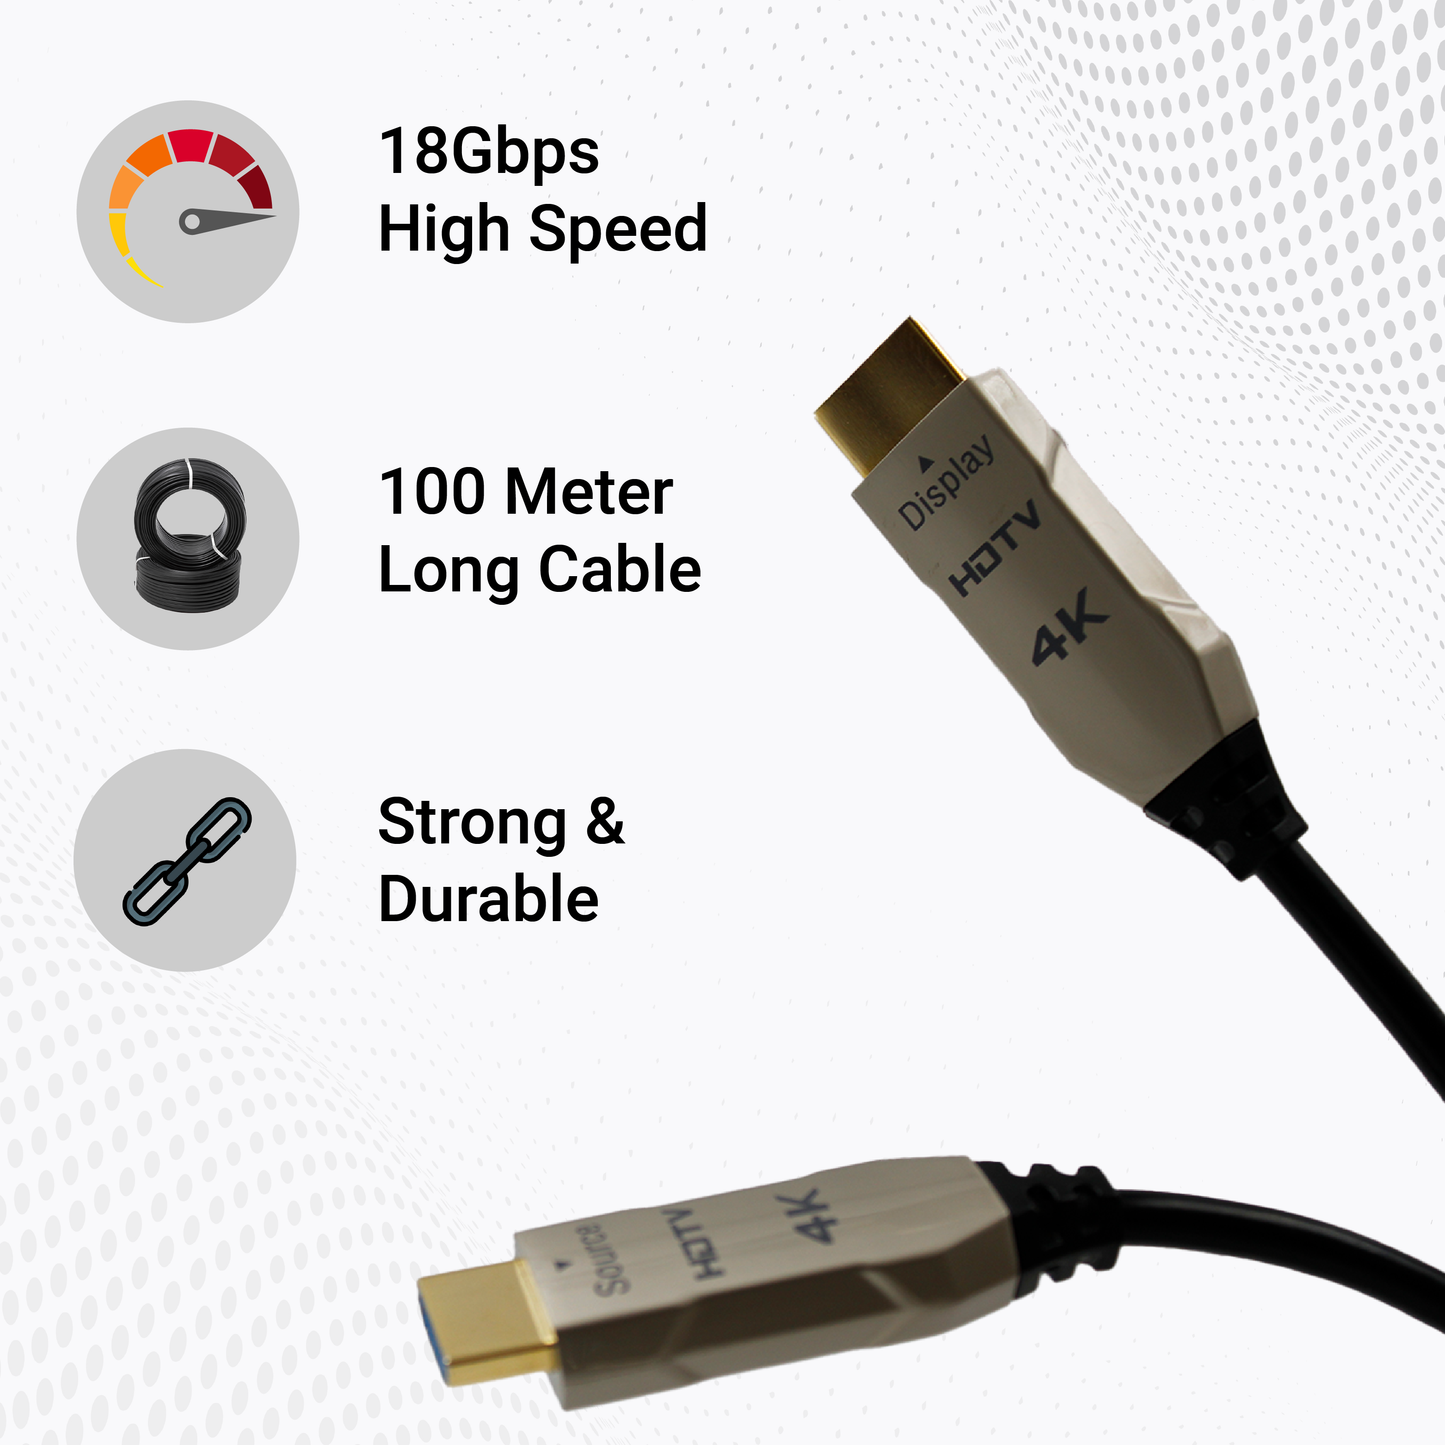 High-Speed AOC HDMI Cable | 18Gb/s Transfer Rate - EmbedTech